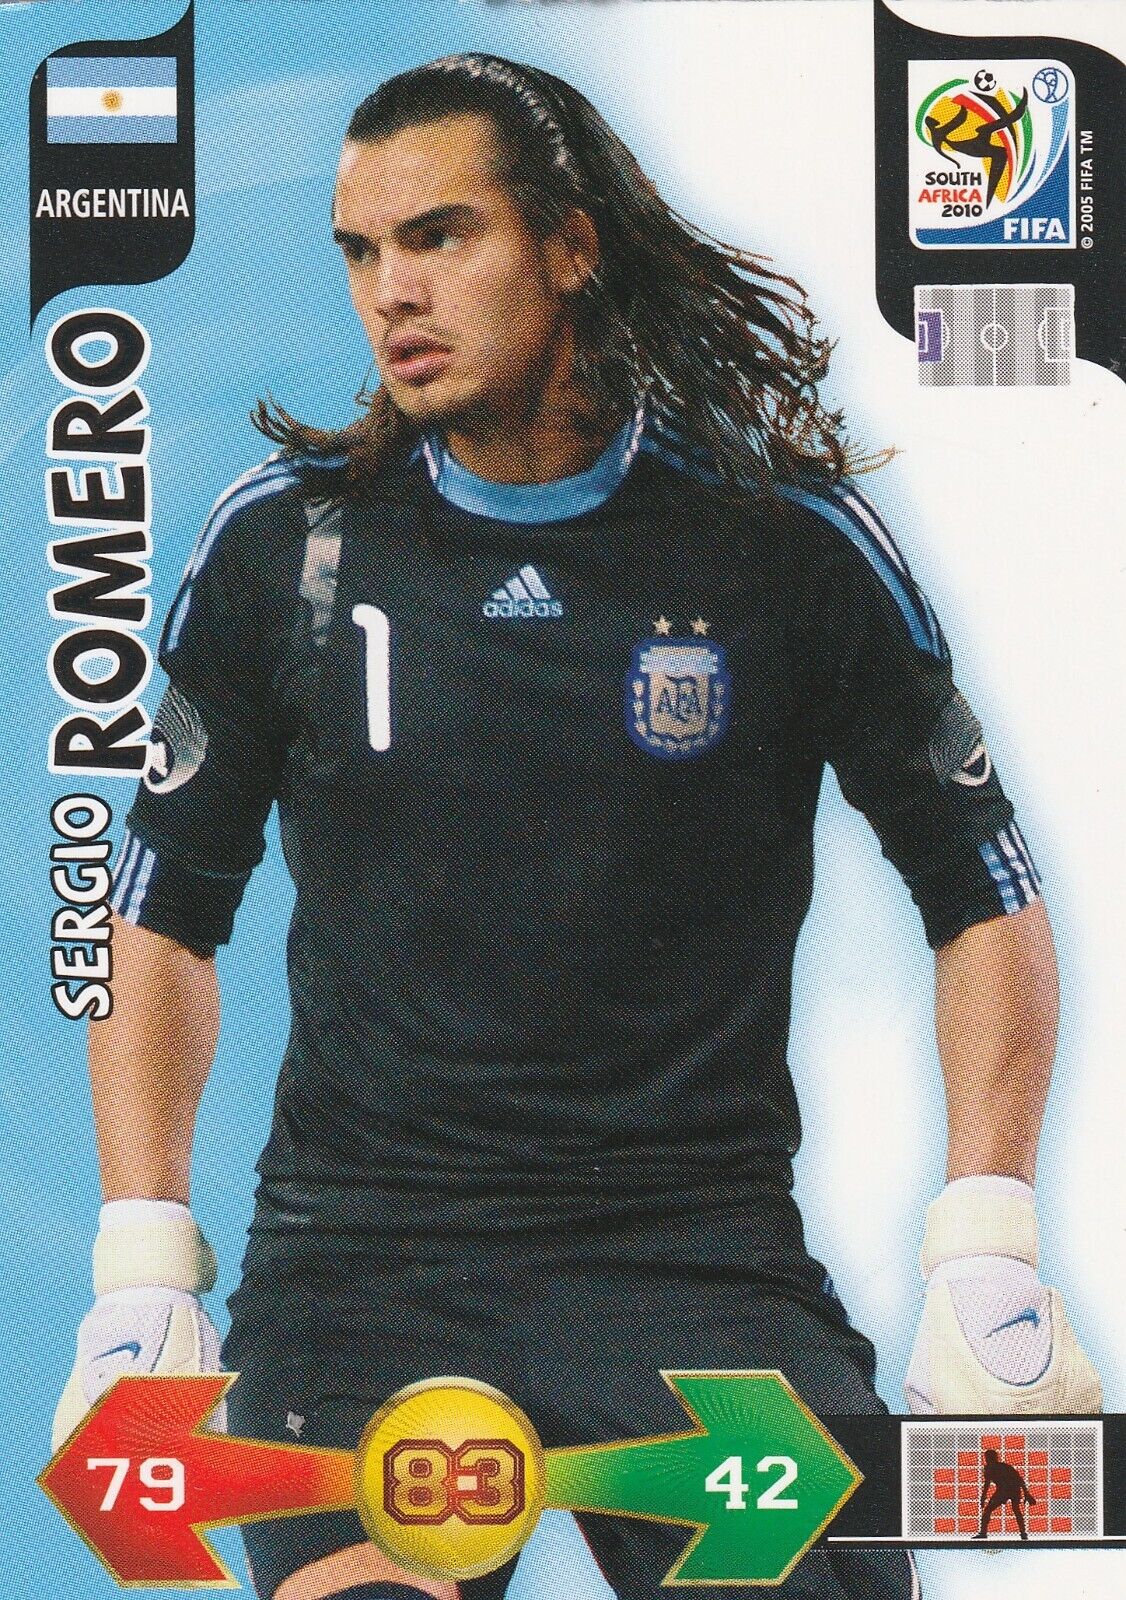 ARGENTINA - ADRENALYN XL PANINI CARDS - FOOT SOUTH AFRICA 2010 - Choose from